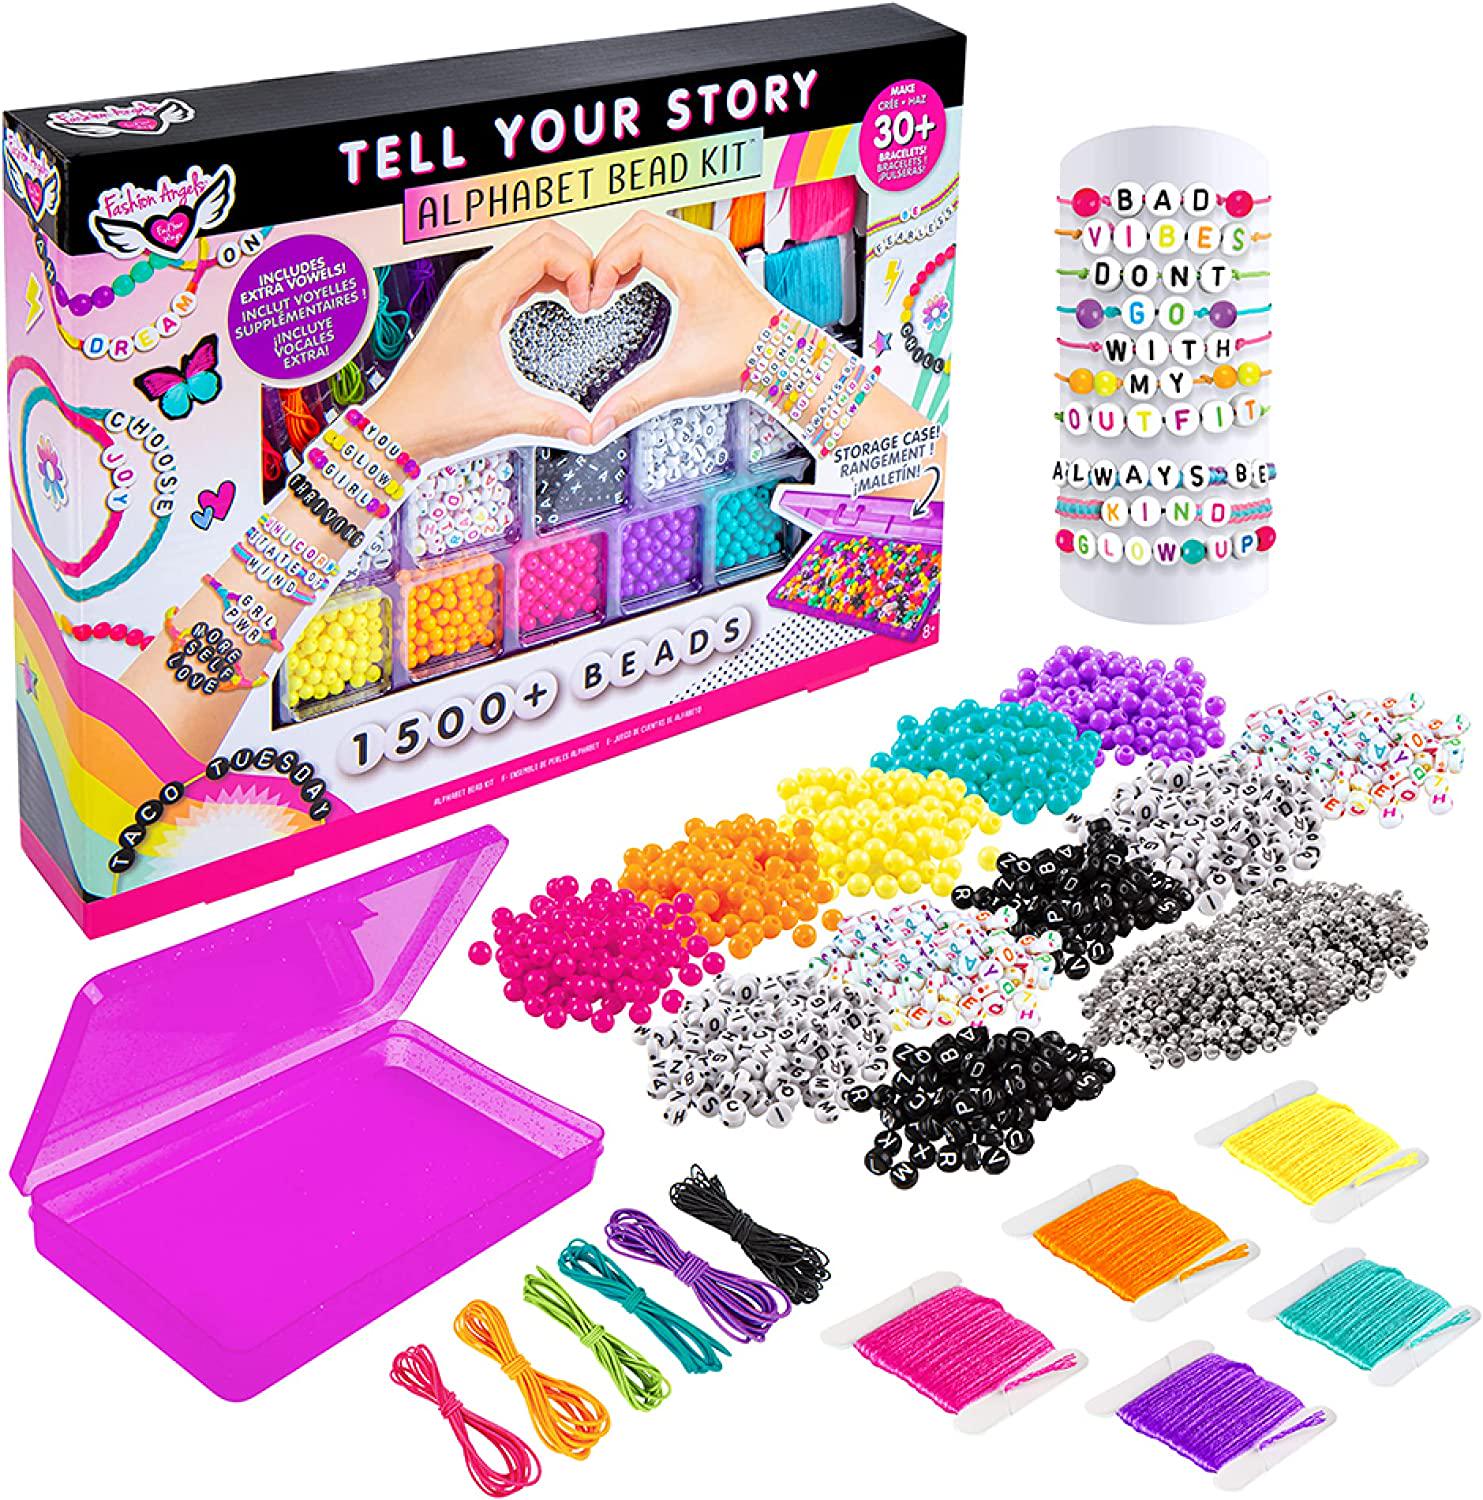 Fashion Angels, Fashion Angels DIY Alphabet Bead Bracelet Making Kit with Case (12381), 1500+ Colorful Charms and Beads, Screen-Free/Arts and Craft/ Jewelry Making, Recommended for Ages 8 and Up